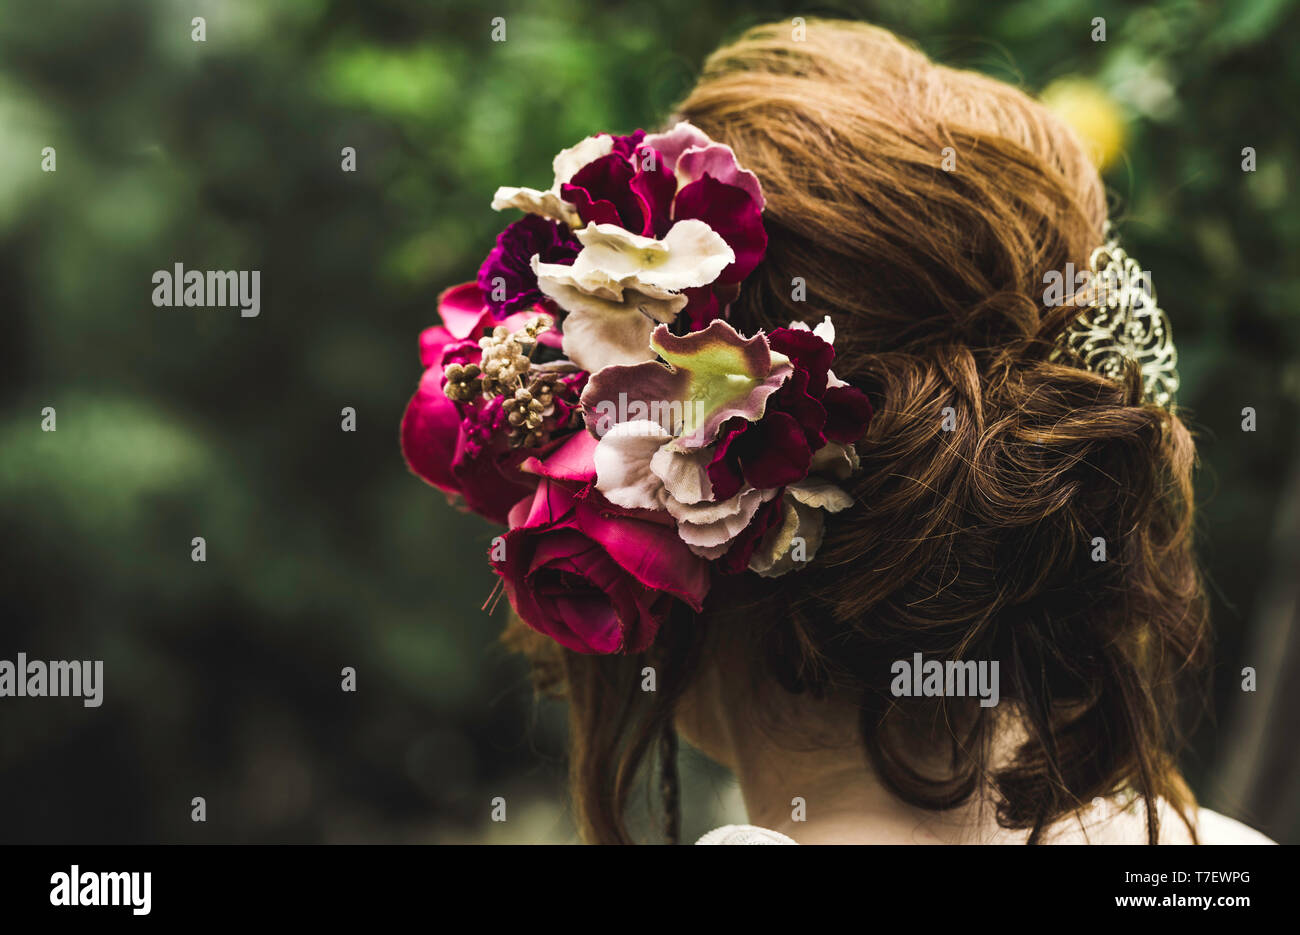 Hairstyle with colorful flowers. Beautiful hair decorated with flowers. Isolated on green background. Hair care concept. Backside view Stock Photo